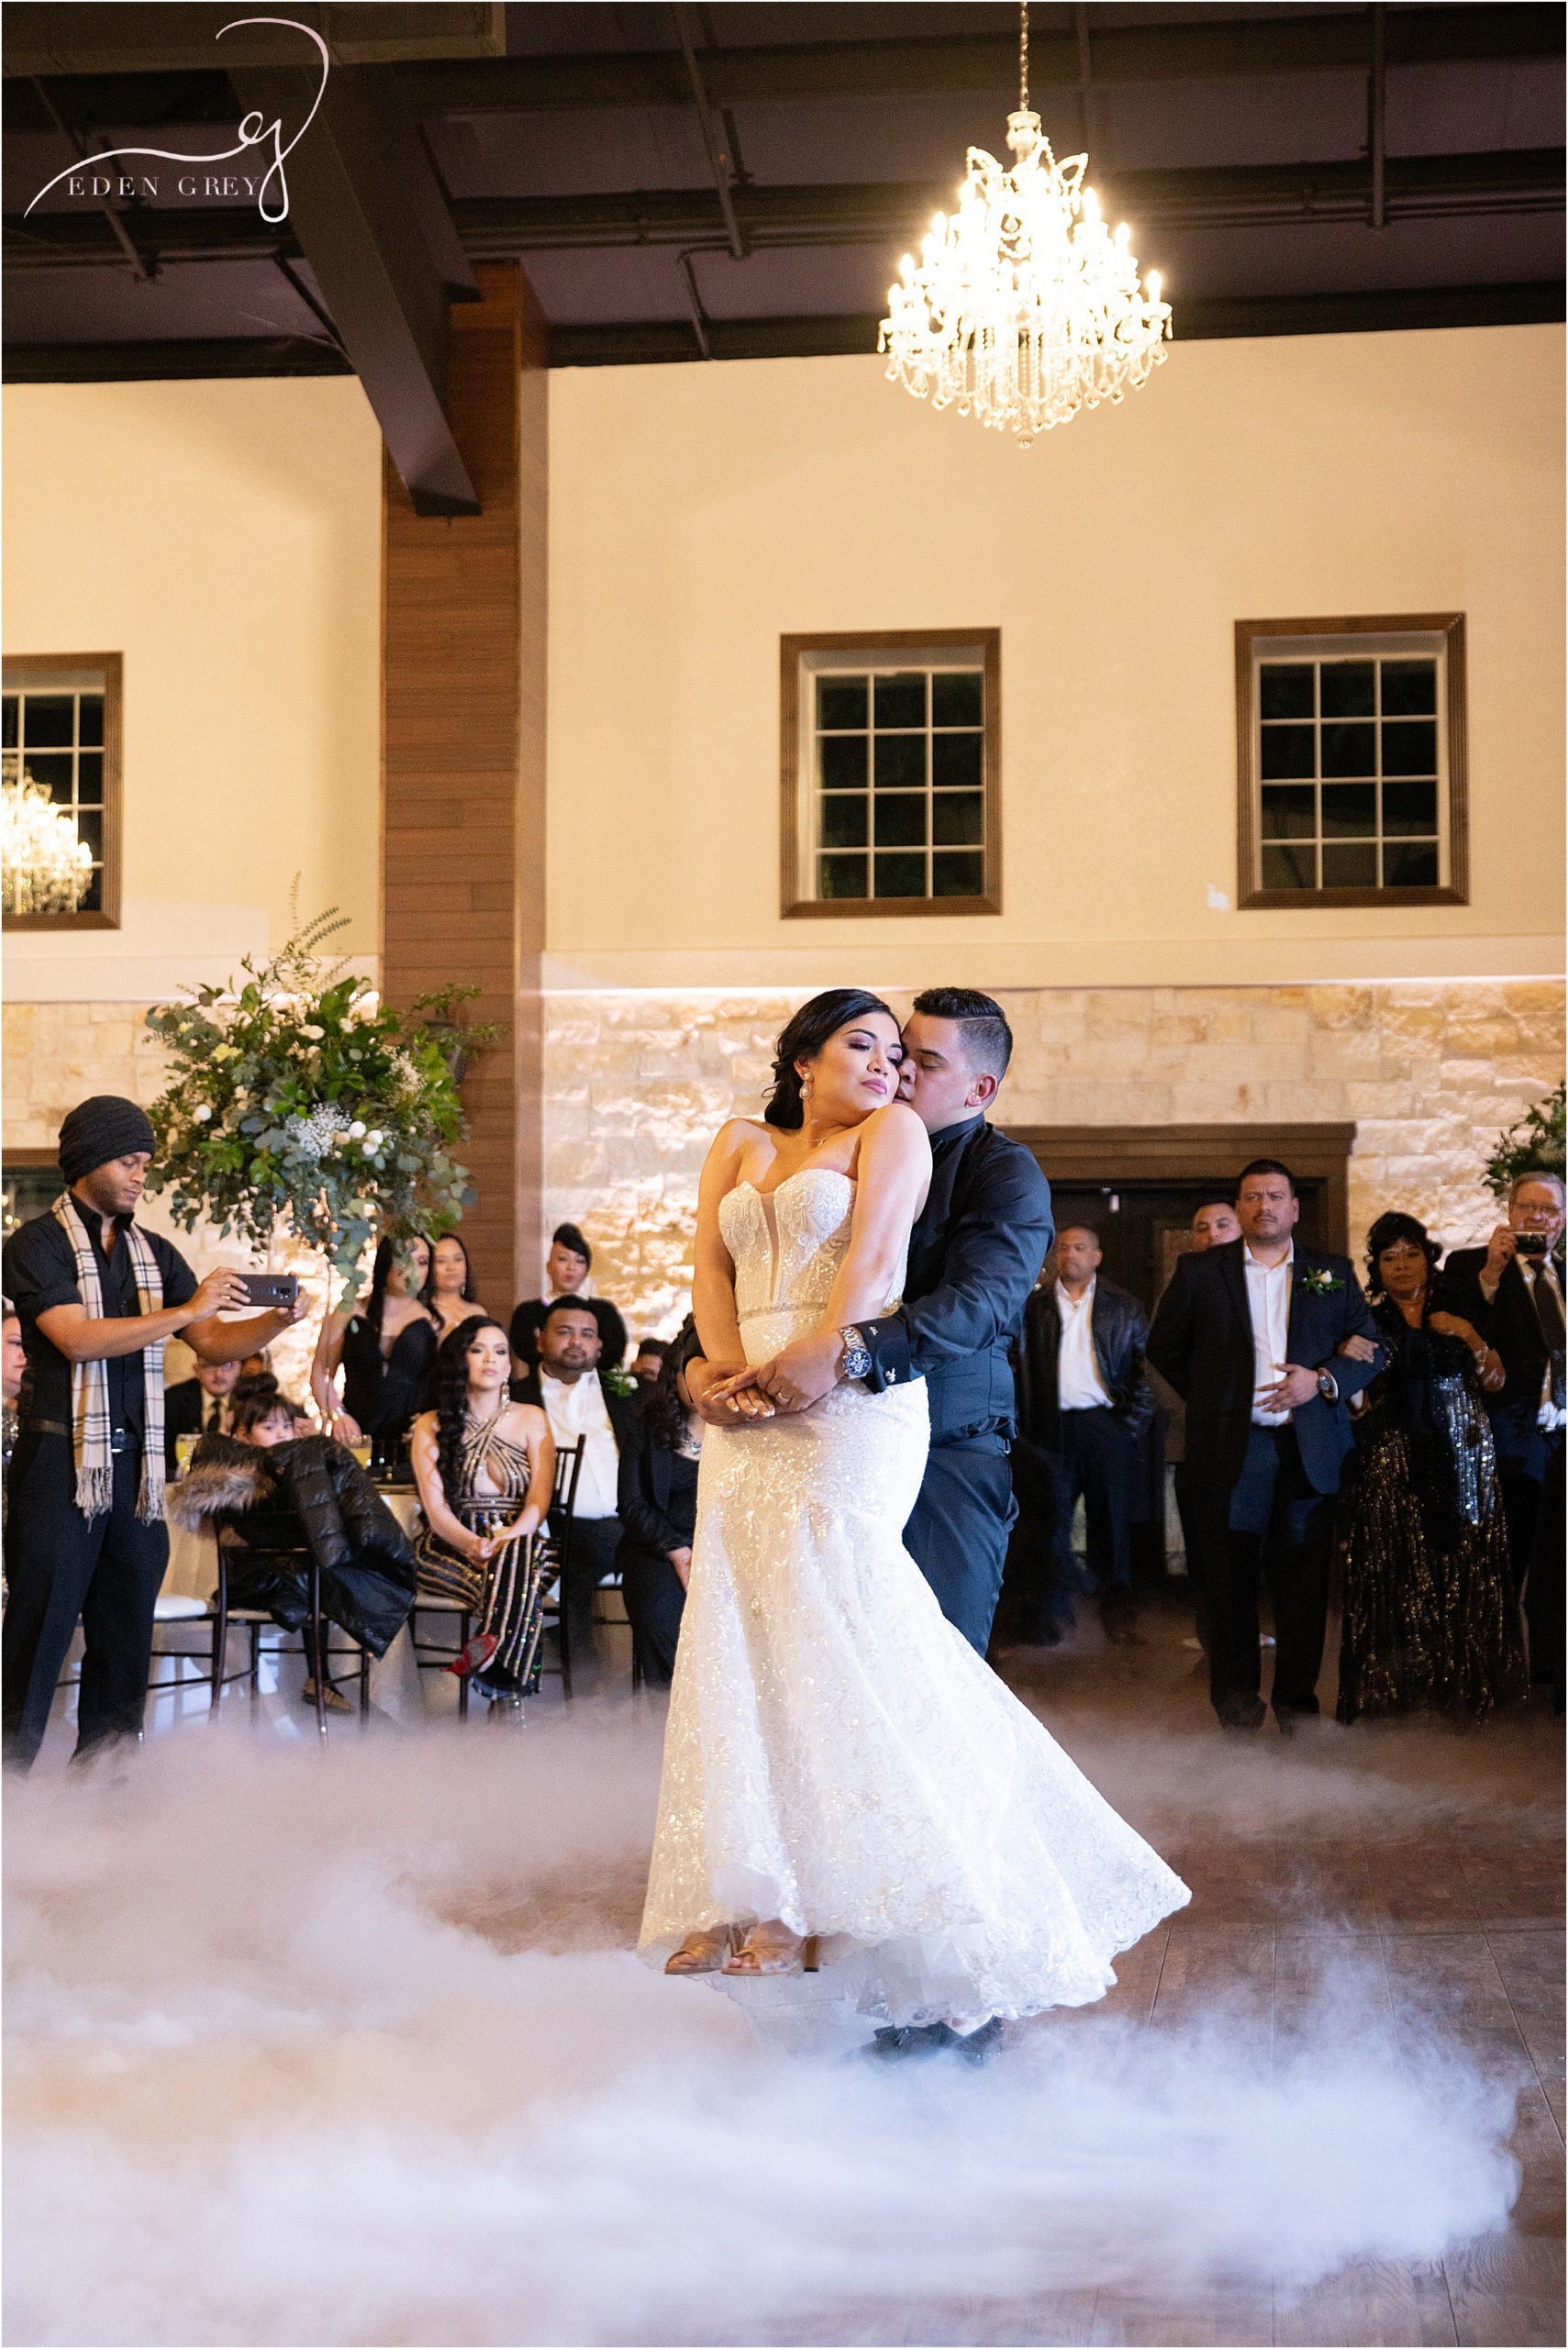 This couple killed their first dance